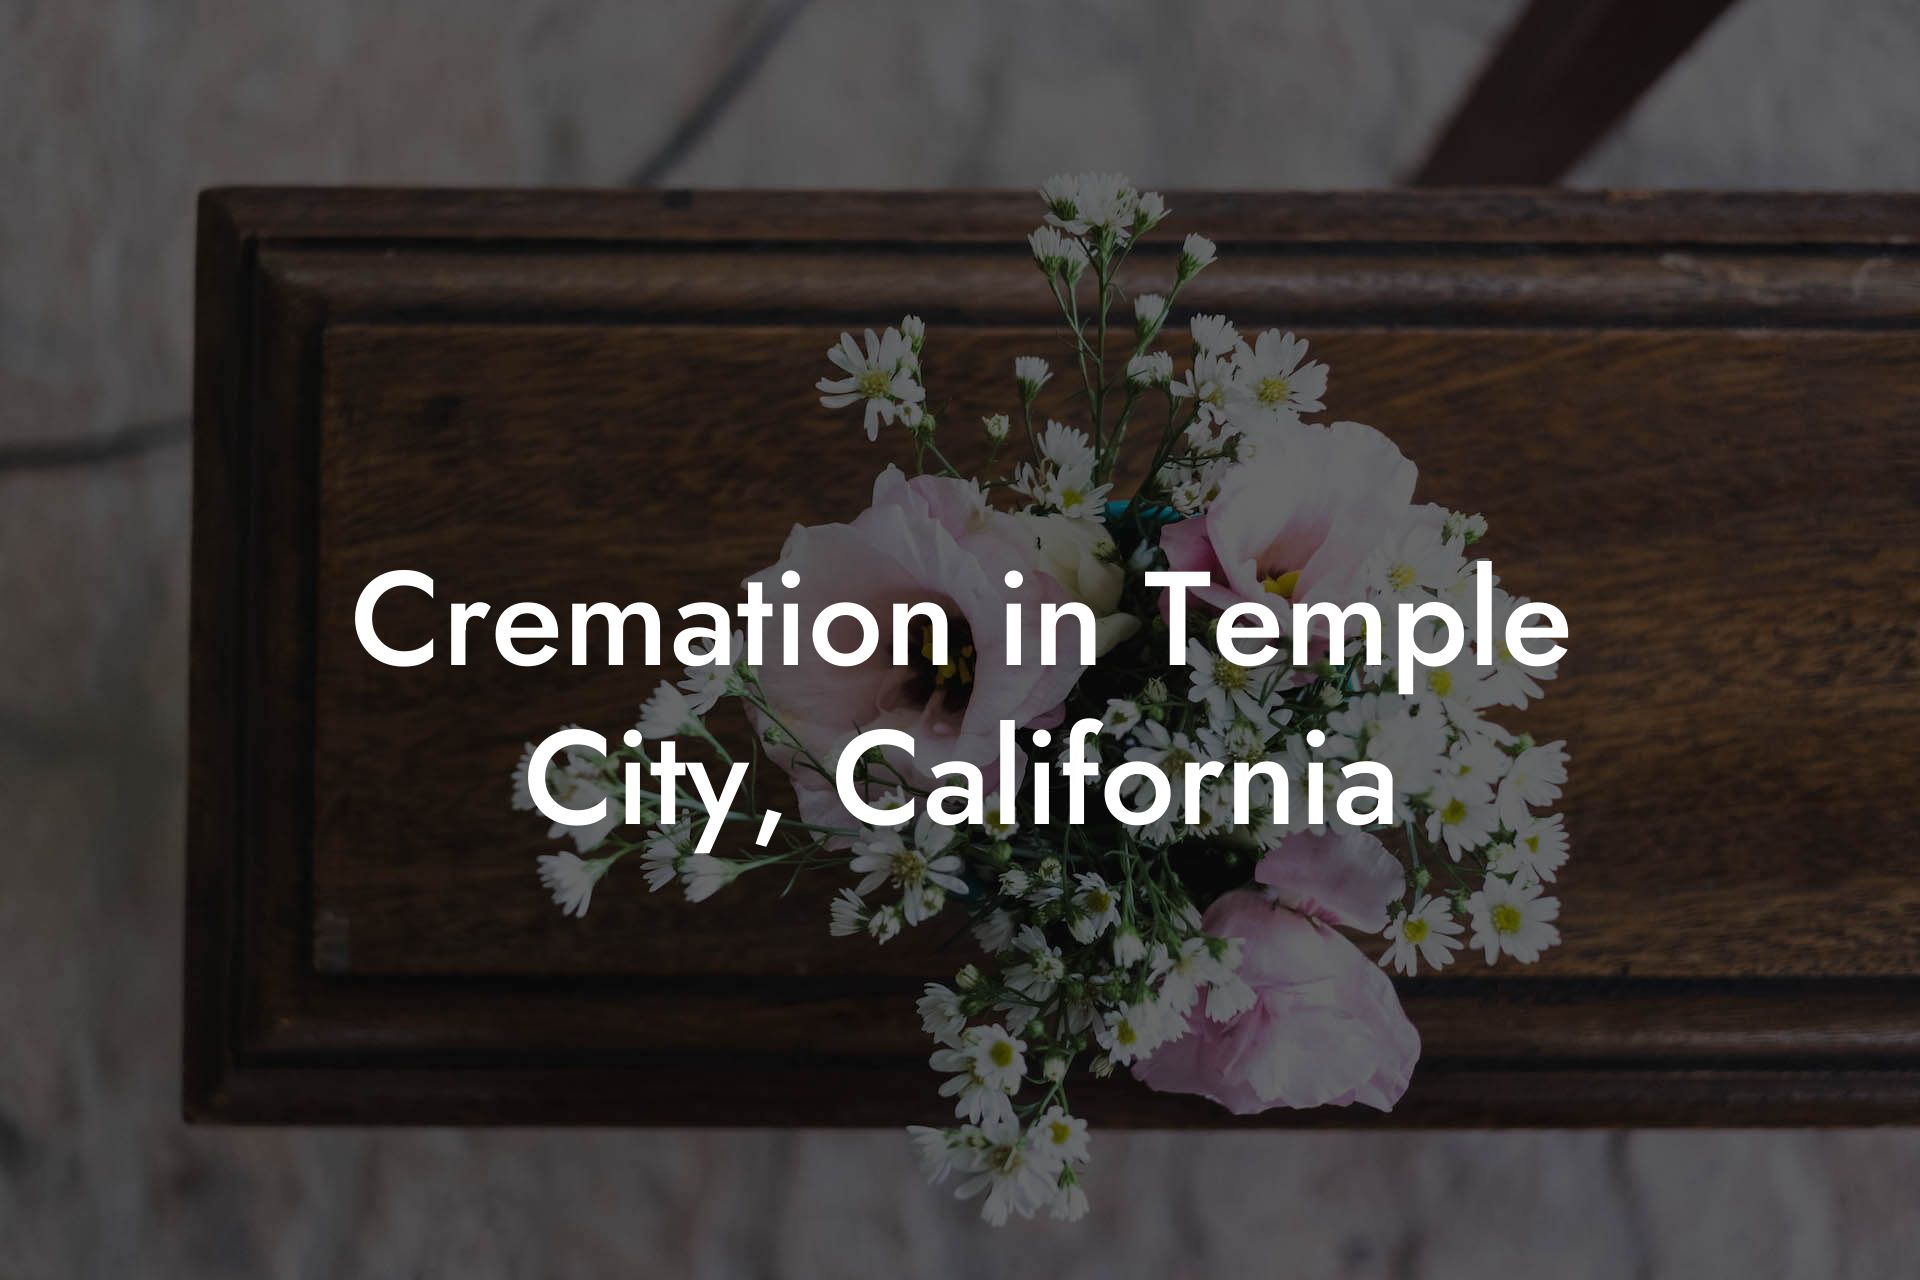 Cremation in Temple City, California